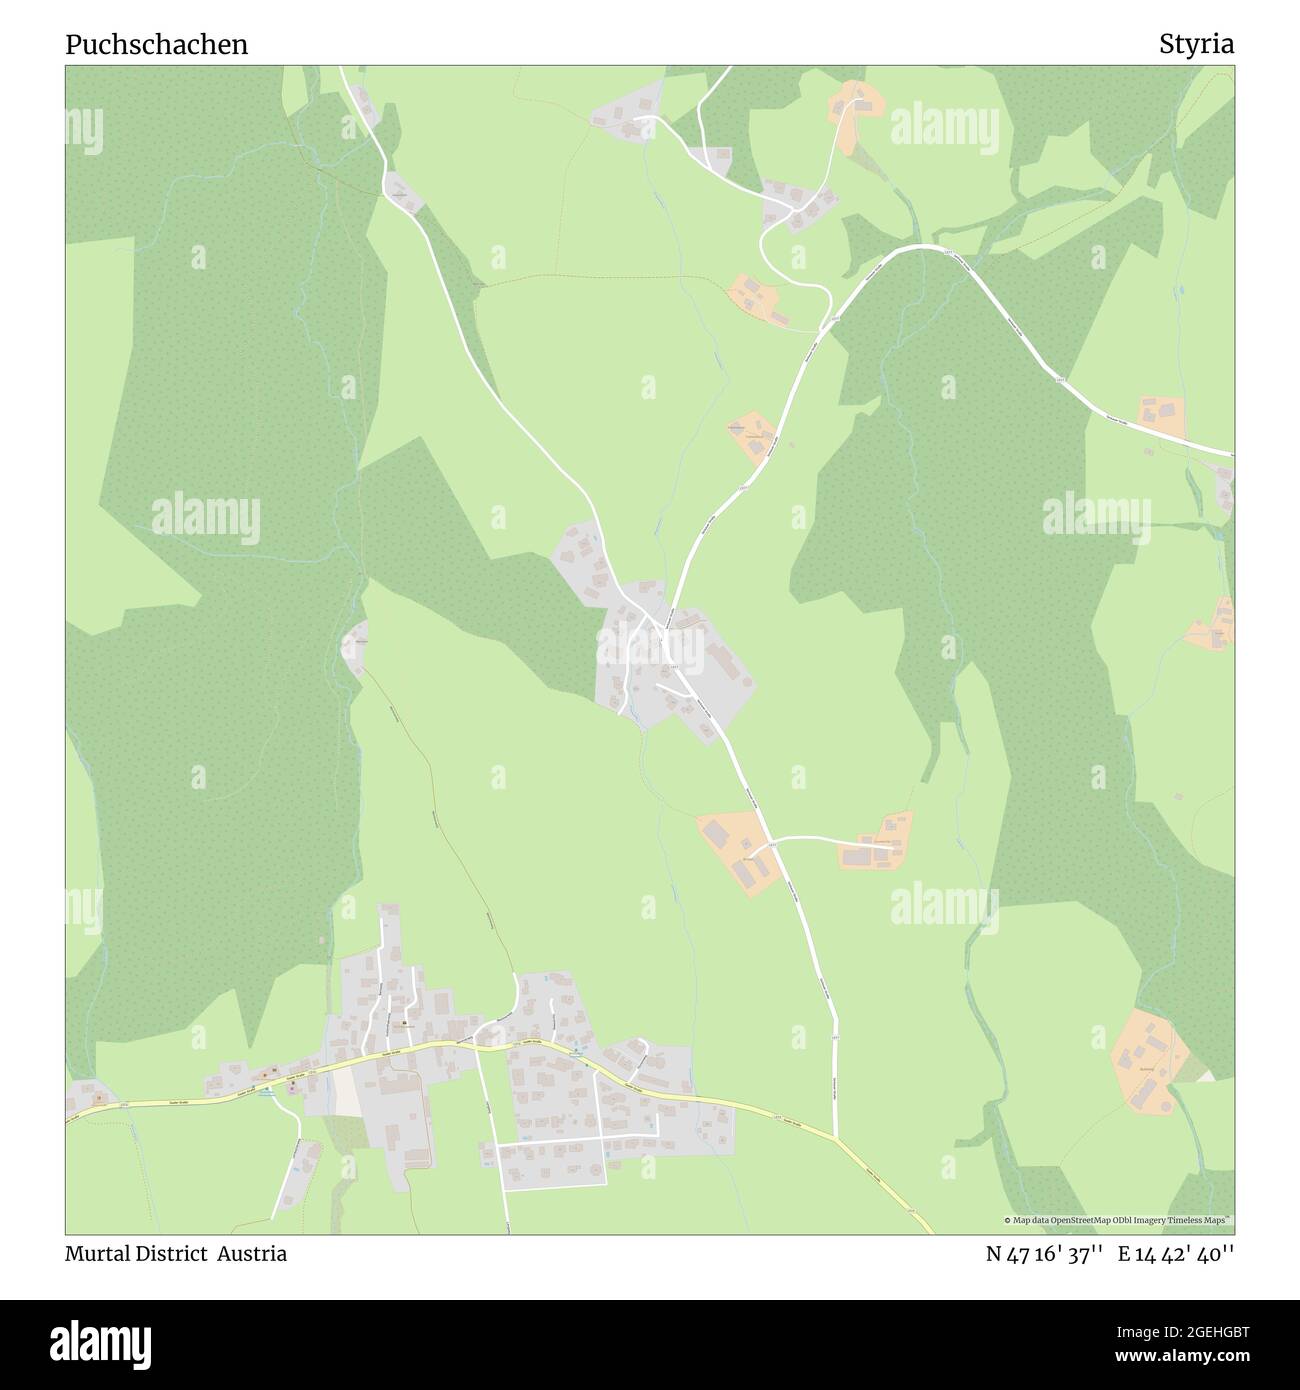 Puchschachen, Murtal District, Austria, Styria, N 47 16' 37'', E 14 42' 40'', map, Timeless Map published in 2021. Travelers, explorers and adventurers like Florence Nightingale, David Livingstone, Ernest Shackleton, Lewis and Clark and Sherlock Holmes relied on maps to plan travels to the world's most remote corners, Timeless Maps is mapping most locations on the globe, showing the achievement of great dreams Stock Photo